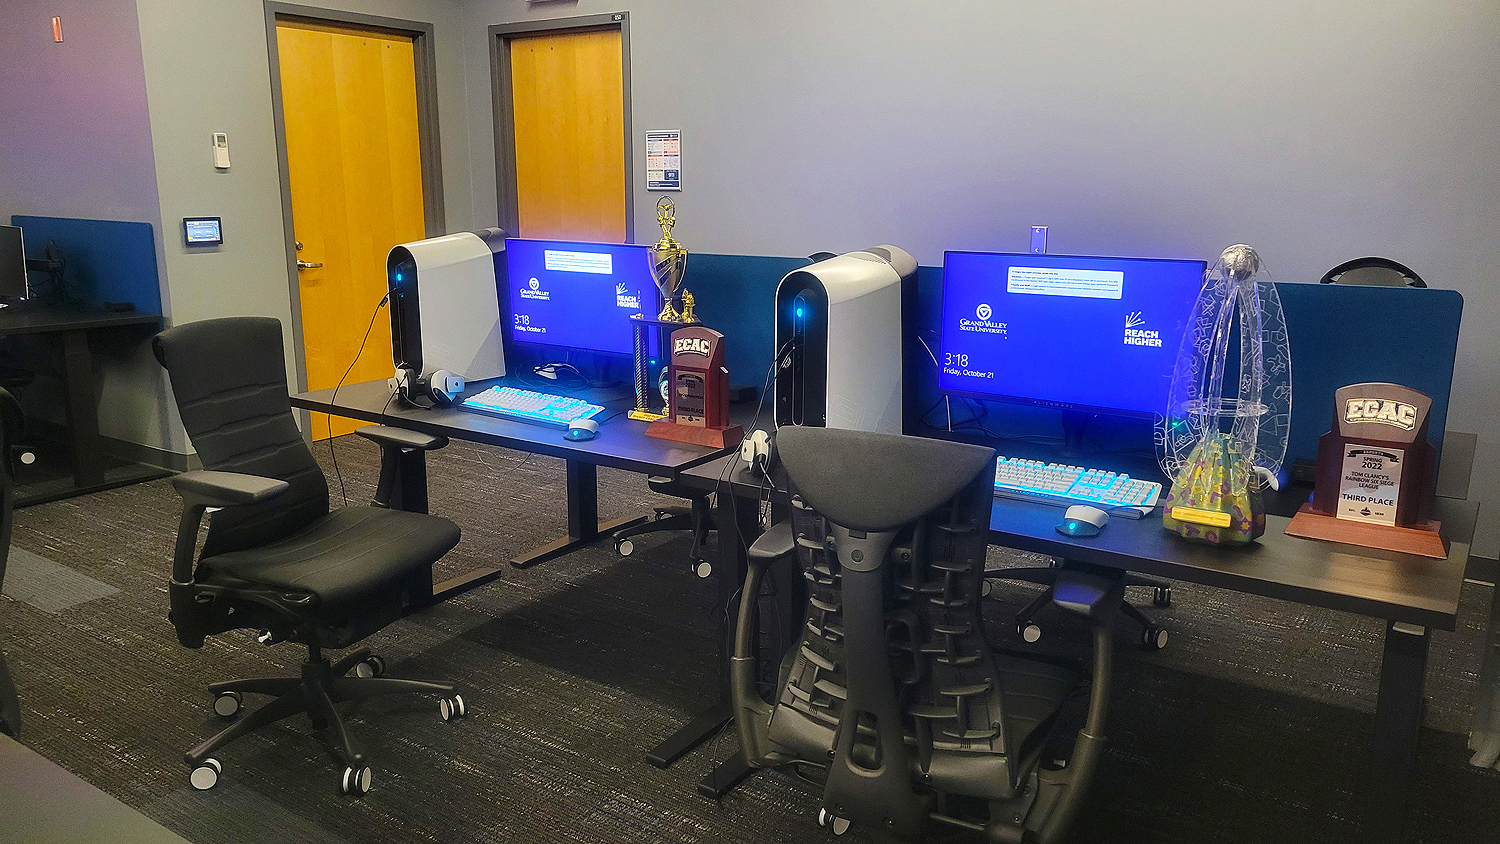 Thumbnail - For the Laker Esports Center, GVSU partnered with local furniture manufacturer Herman Miller for the tables, Logitech gaming chairs, and accessories.